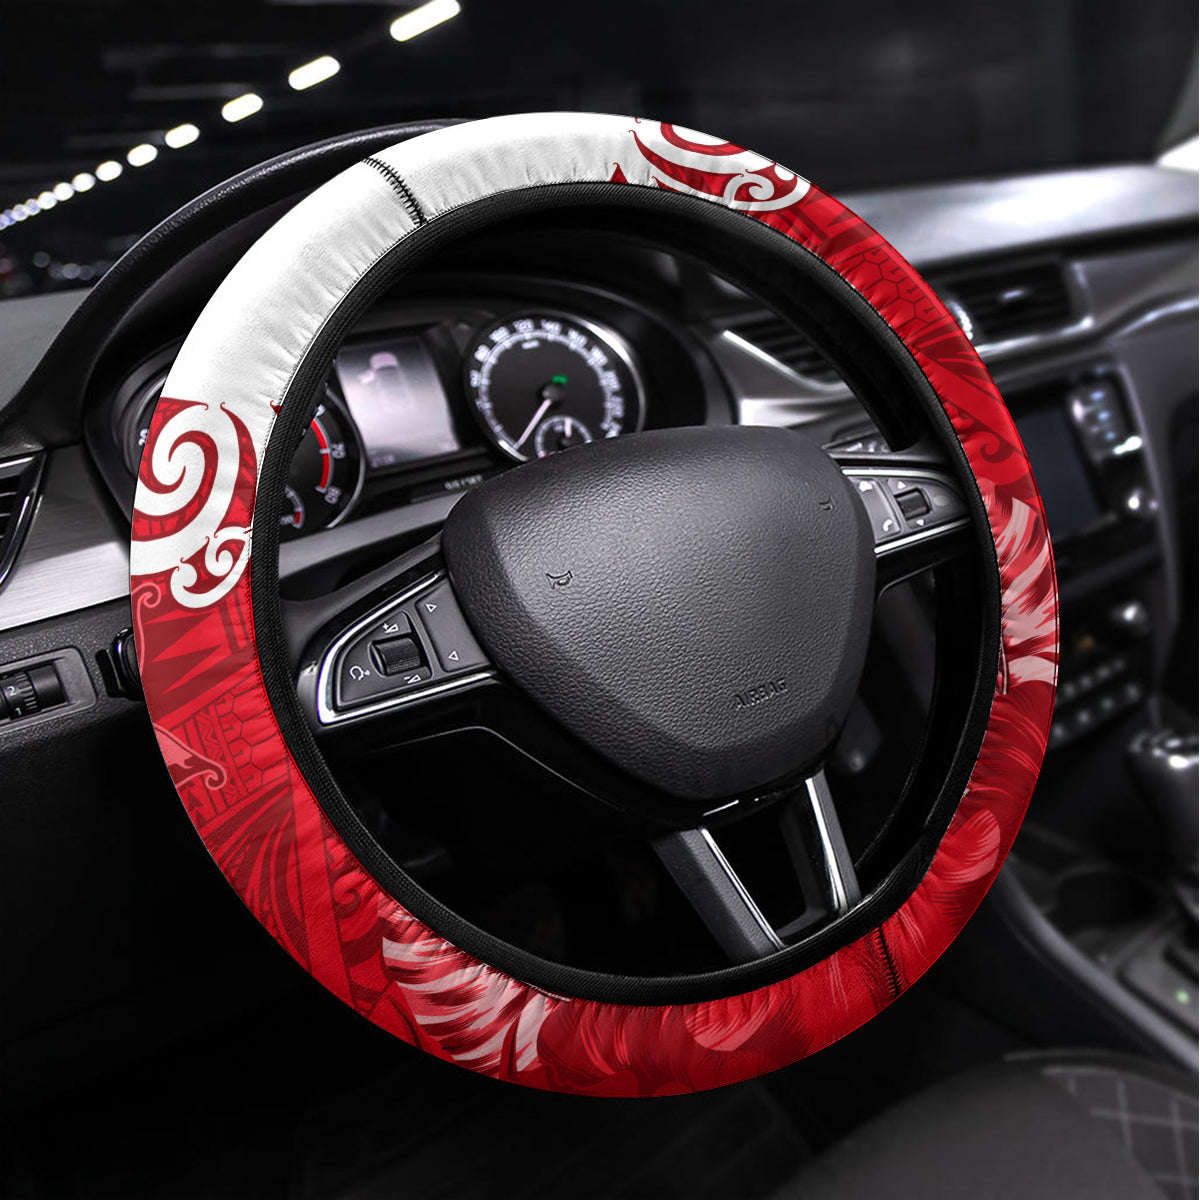 Custom New Zealand Womens Day Steering Wheel Cover Traditional Maori Woman Polynesian Pattern Red Color LT03 Universal Fit Red - Polynesian Pride